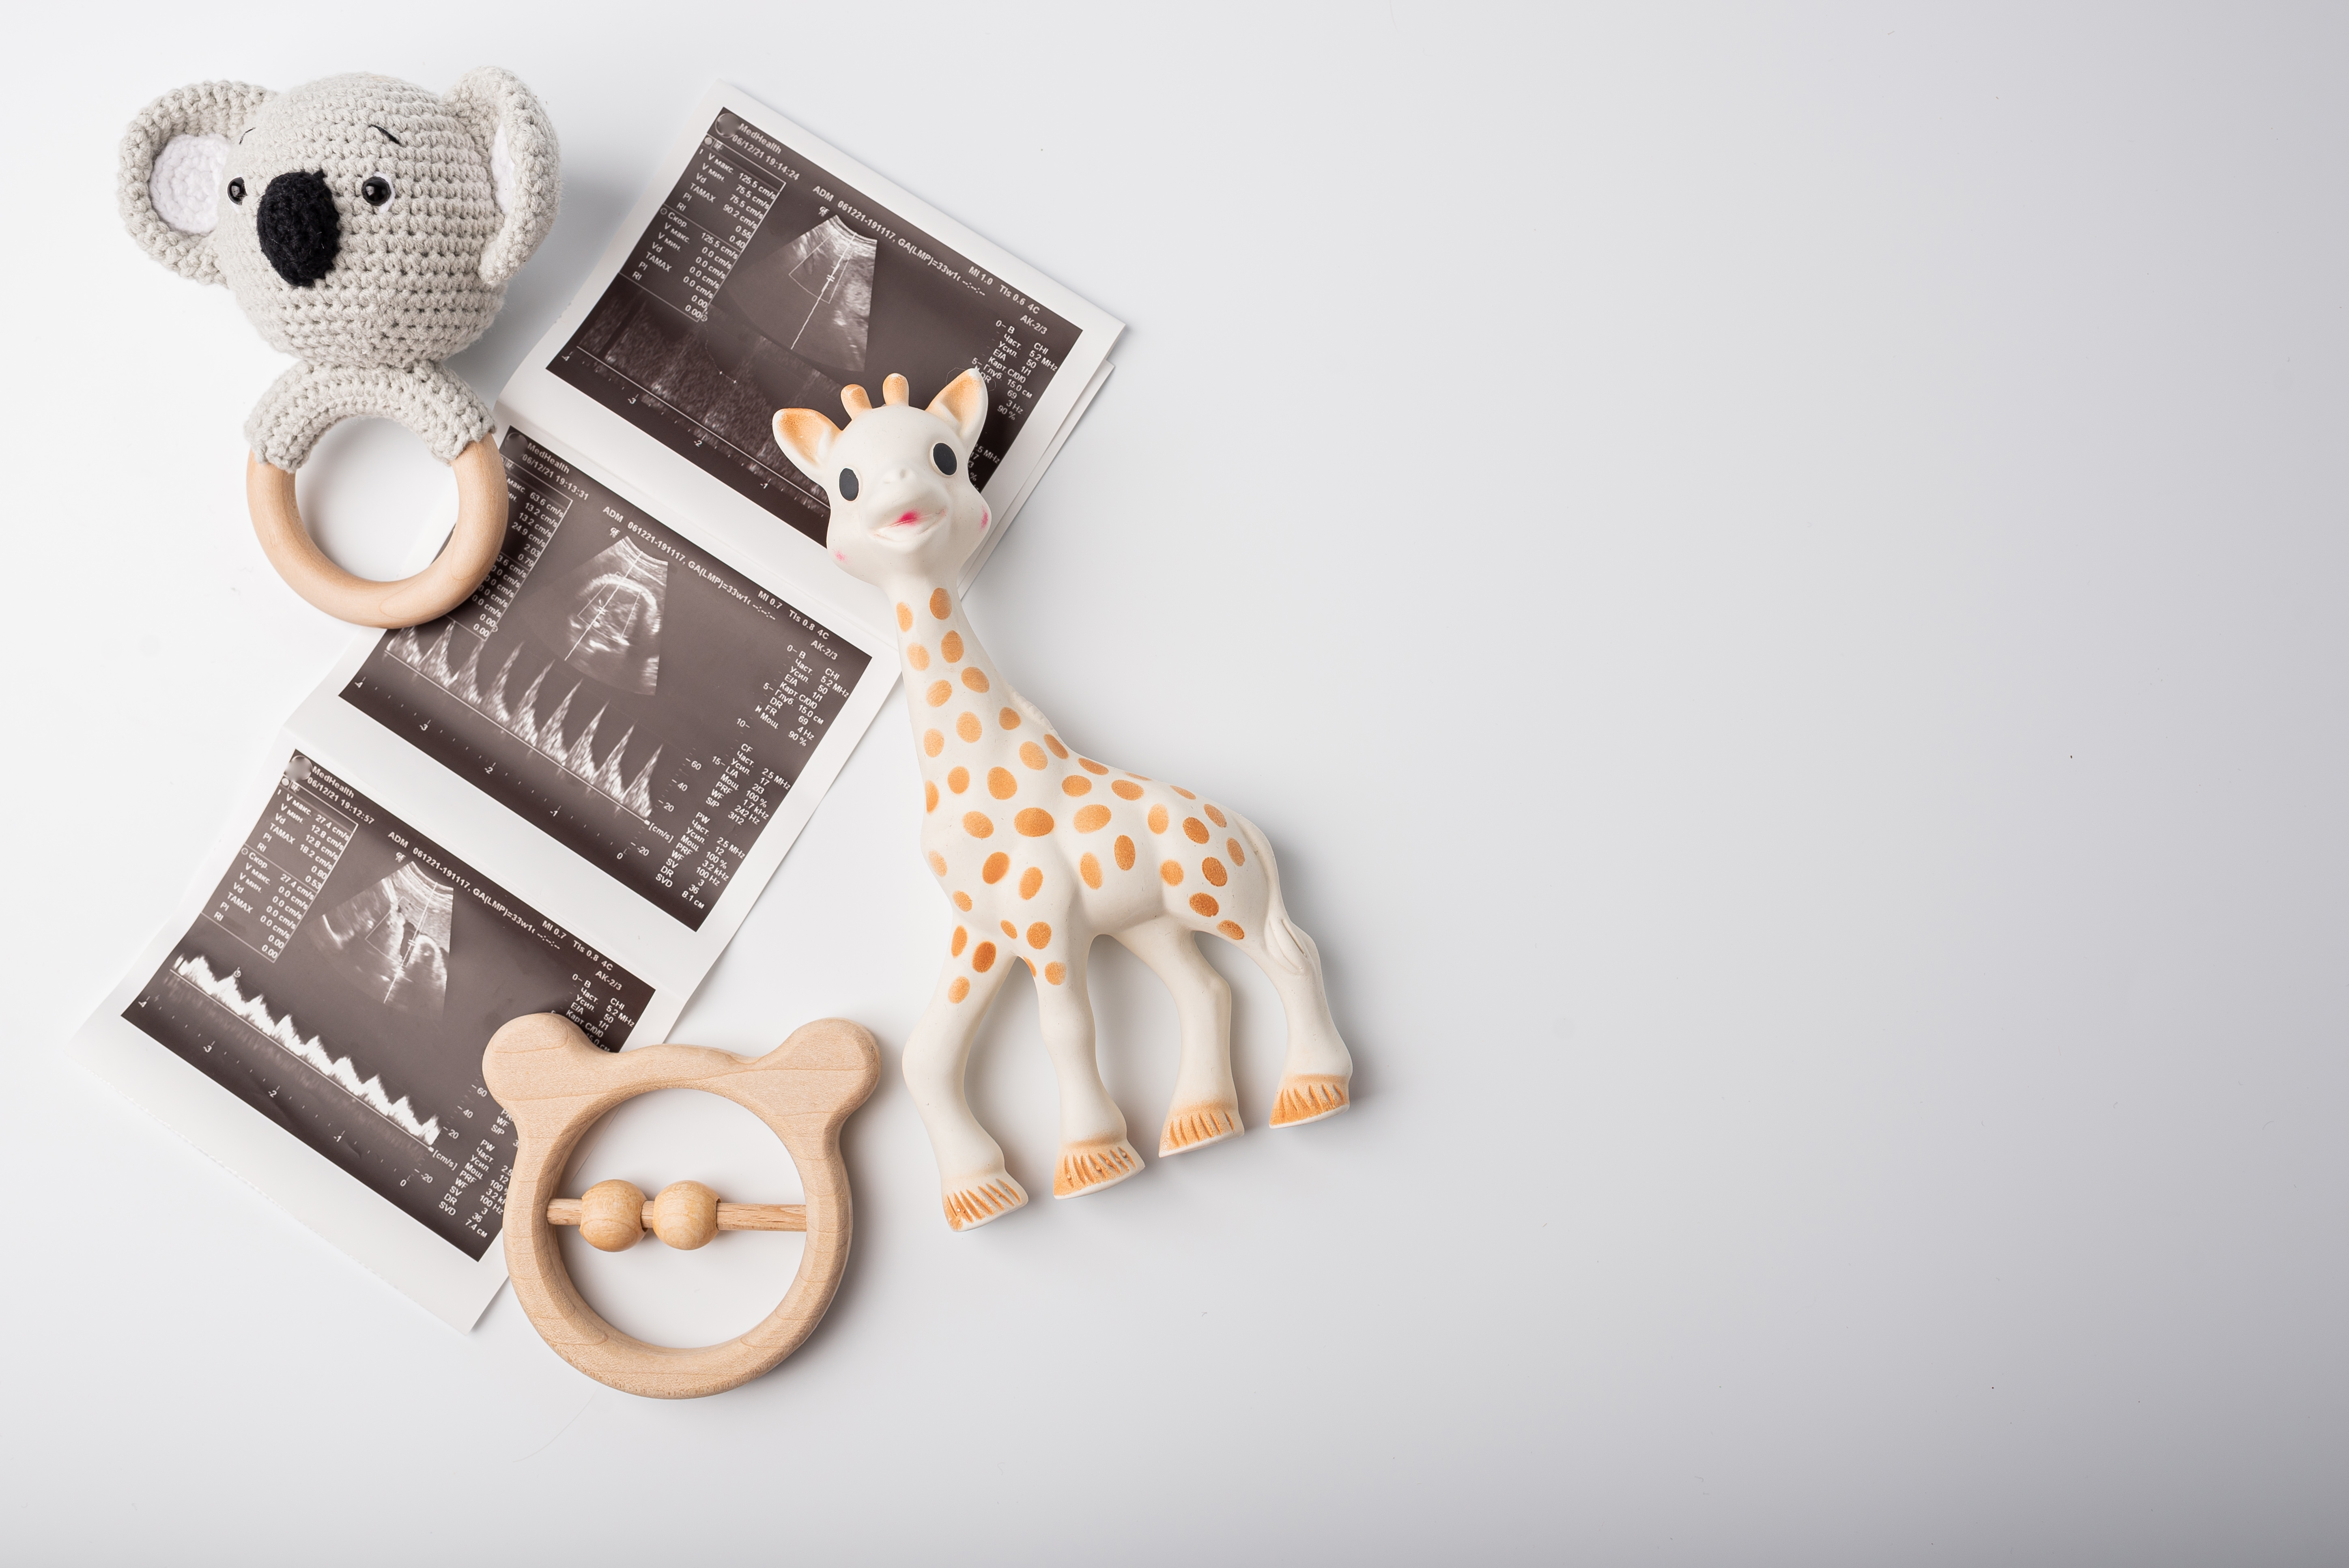 Baby toys with ultrasound picture | Source: Shutterstock